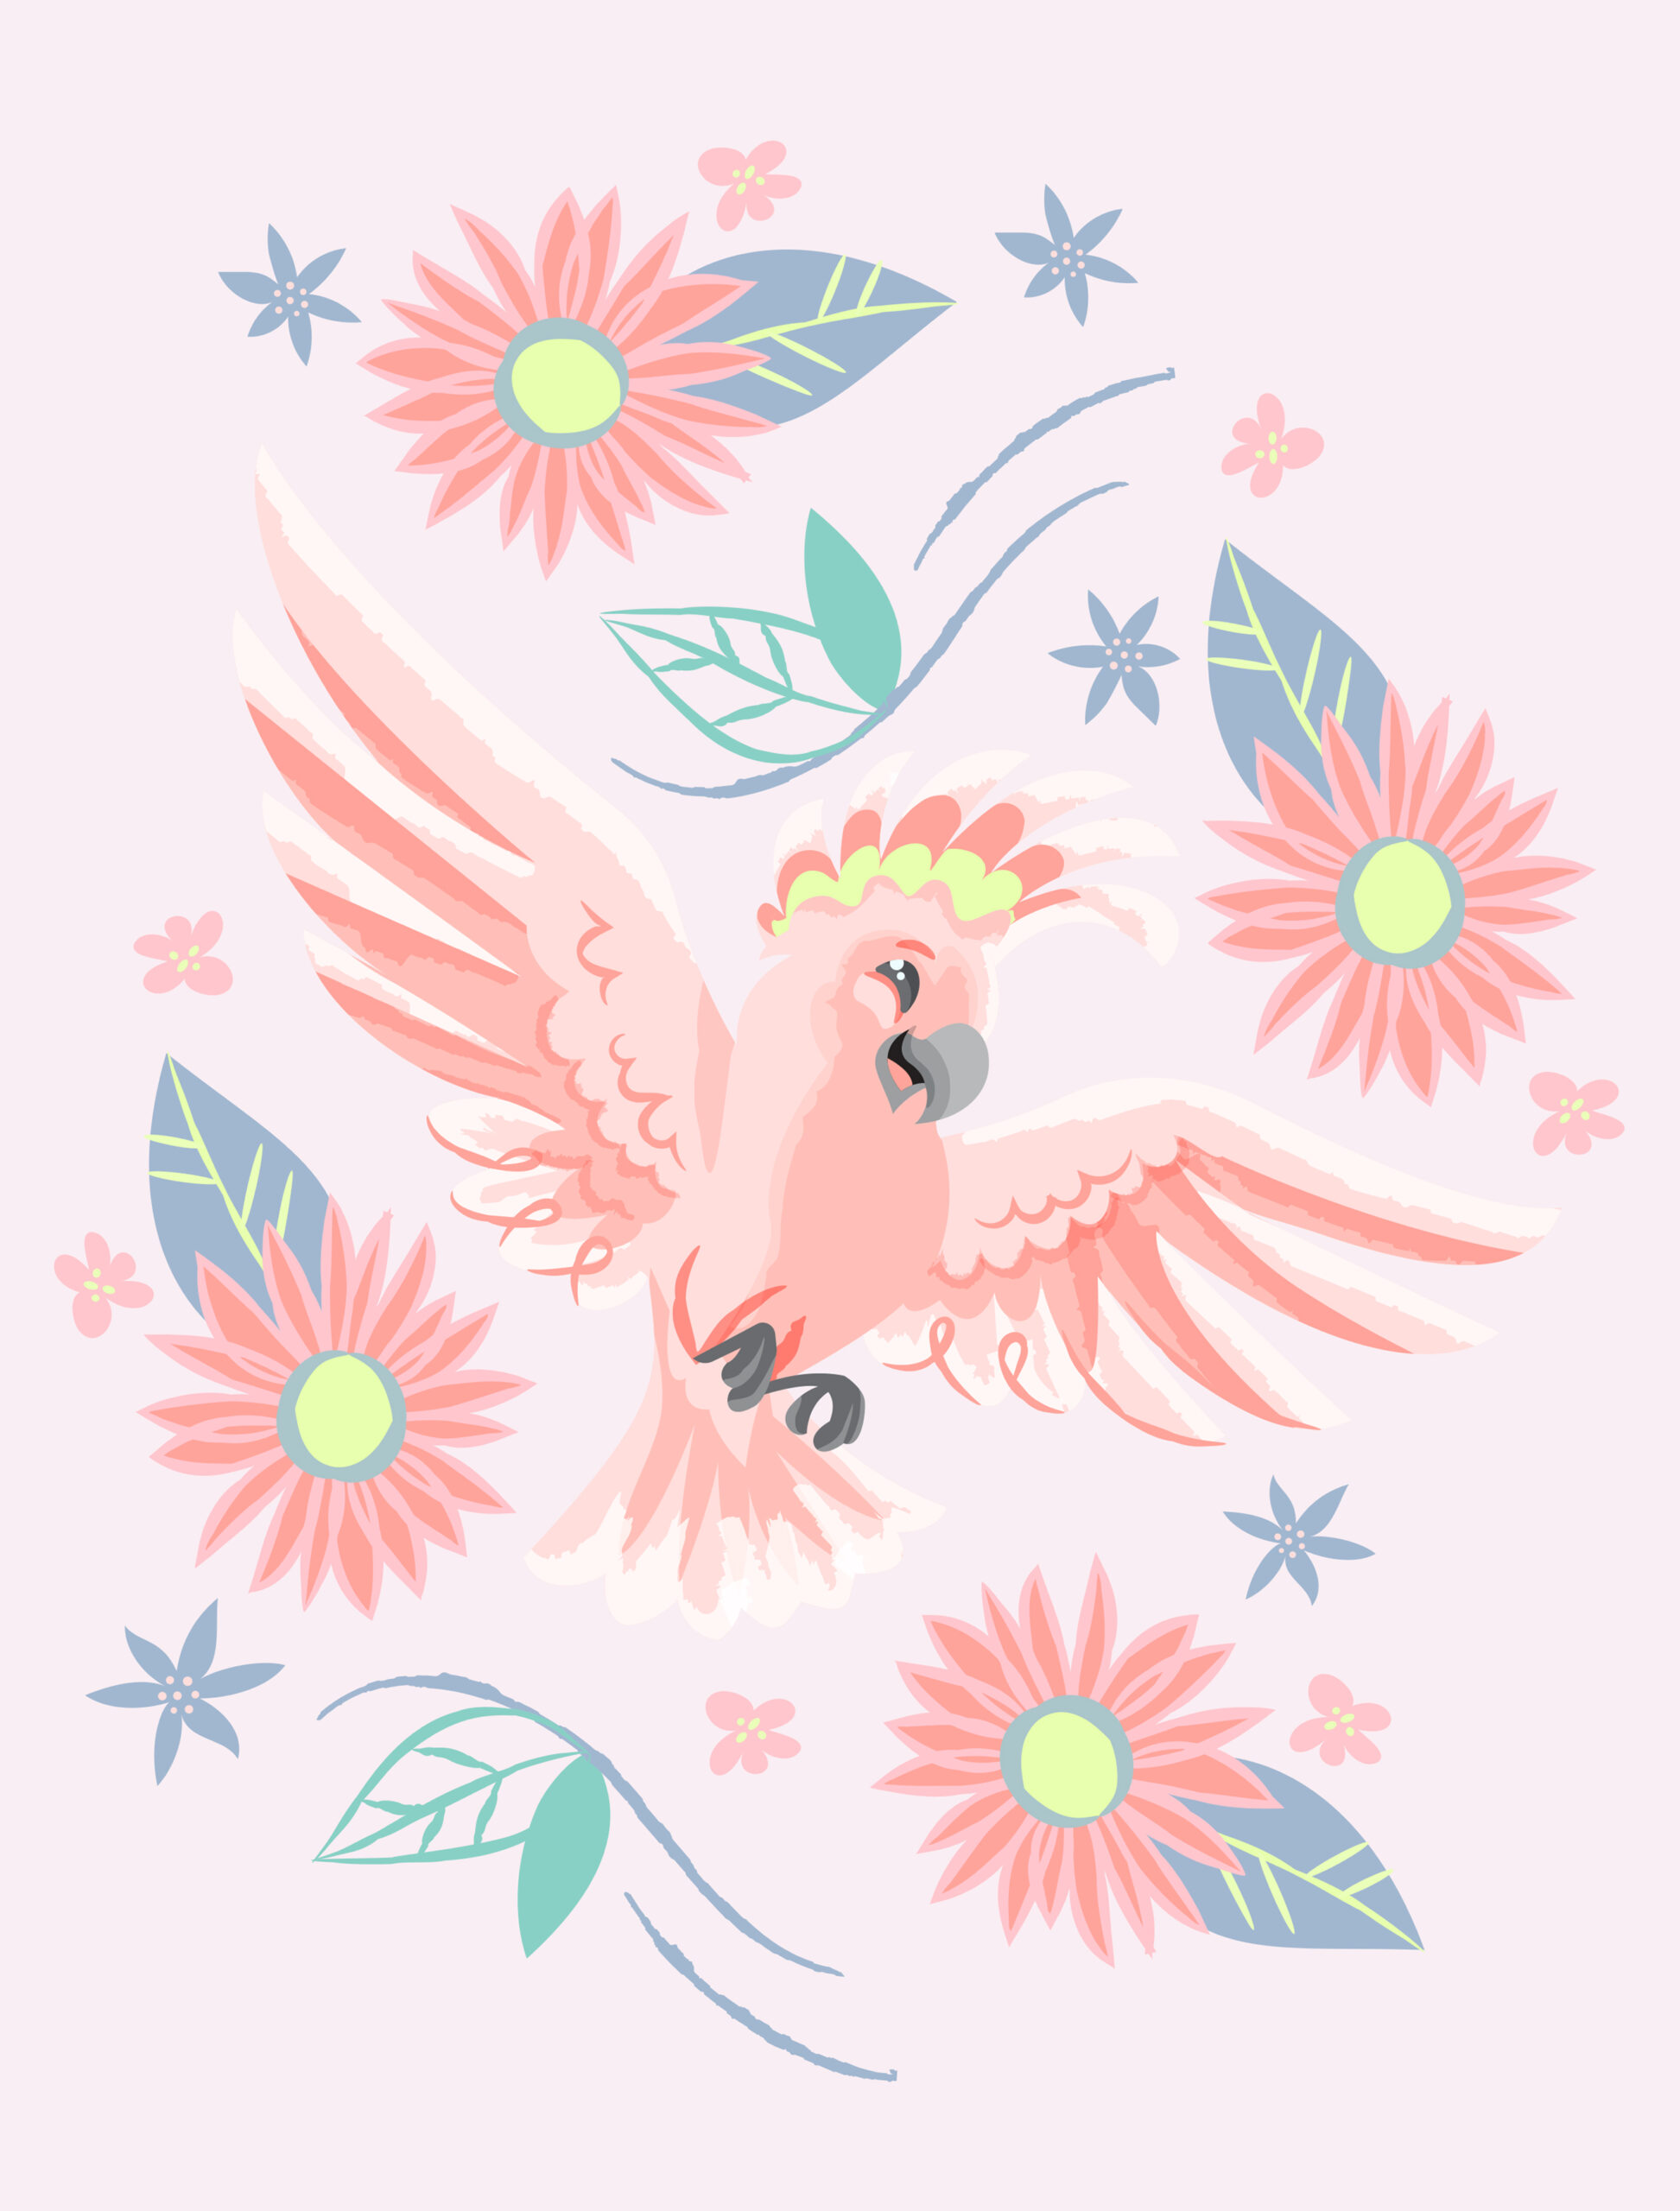 Pink cockatoo character art, spreading her wings amid pastel-colored flowers.